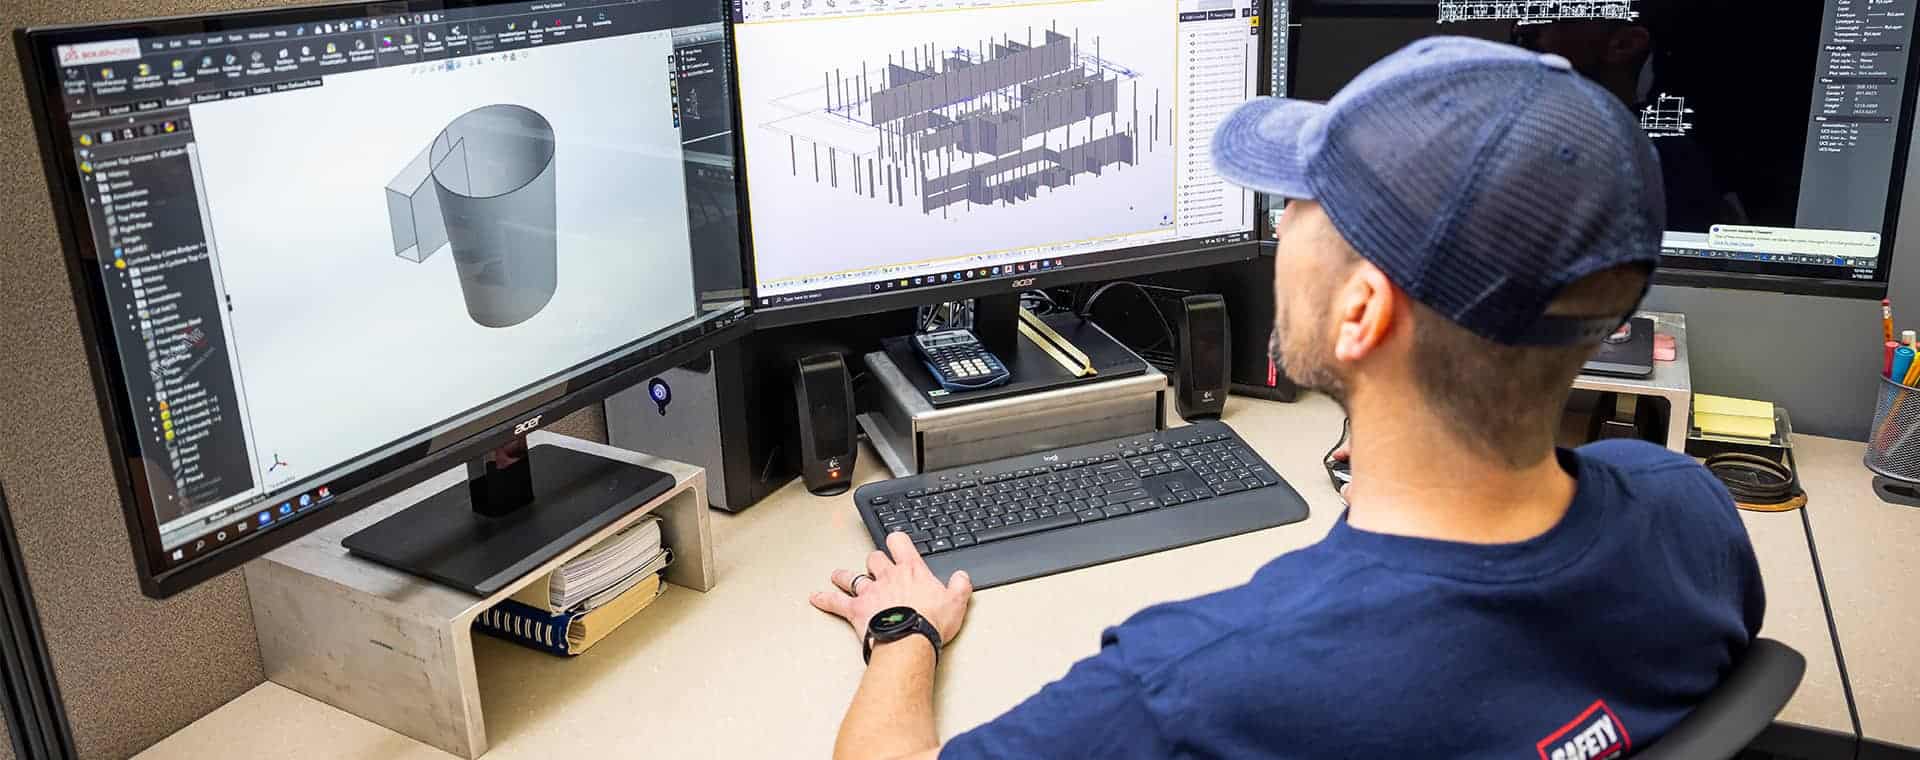 team member using TEKLA 3d modeling to work on a metalworking project wearing blue baseball cap with the word safety on his shirt